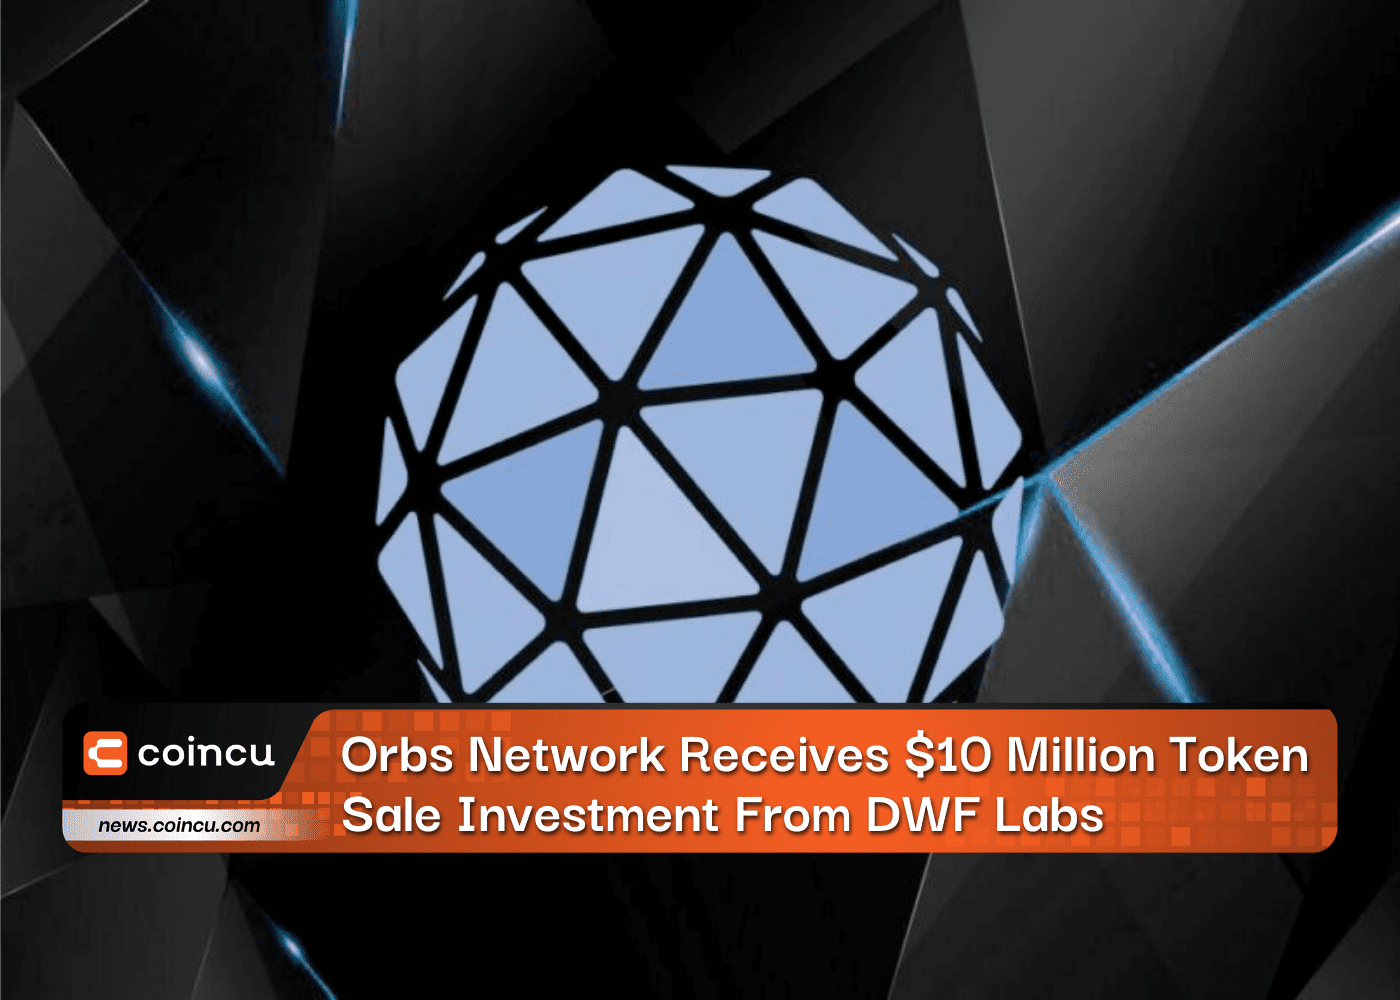 Orbs Network Receives $10 Million Token Sale Investment From DWF Labs